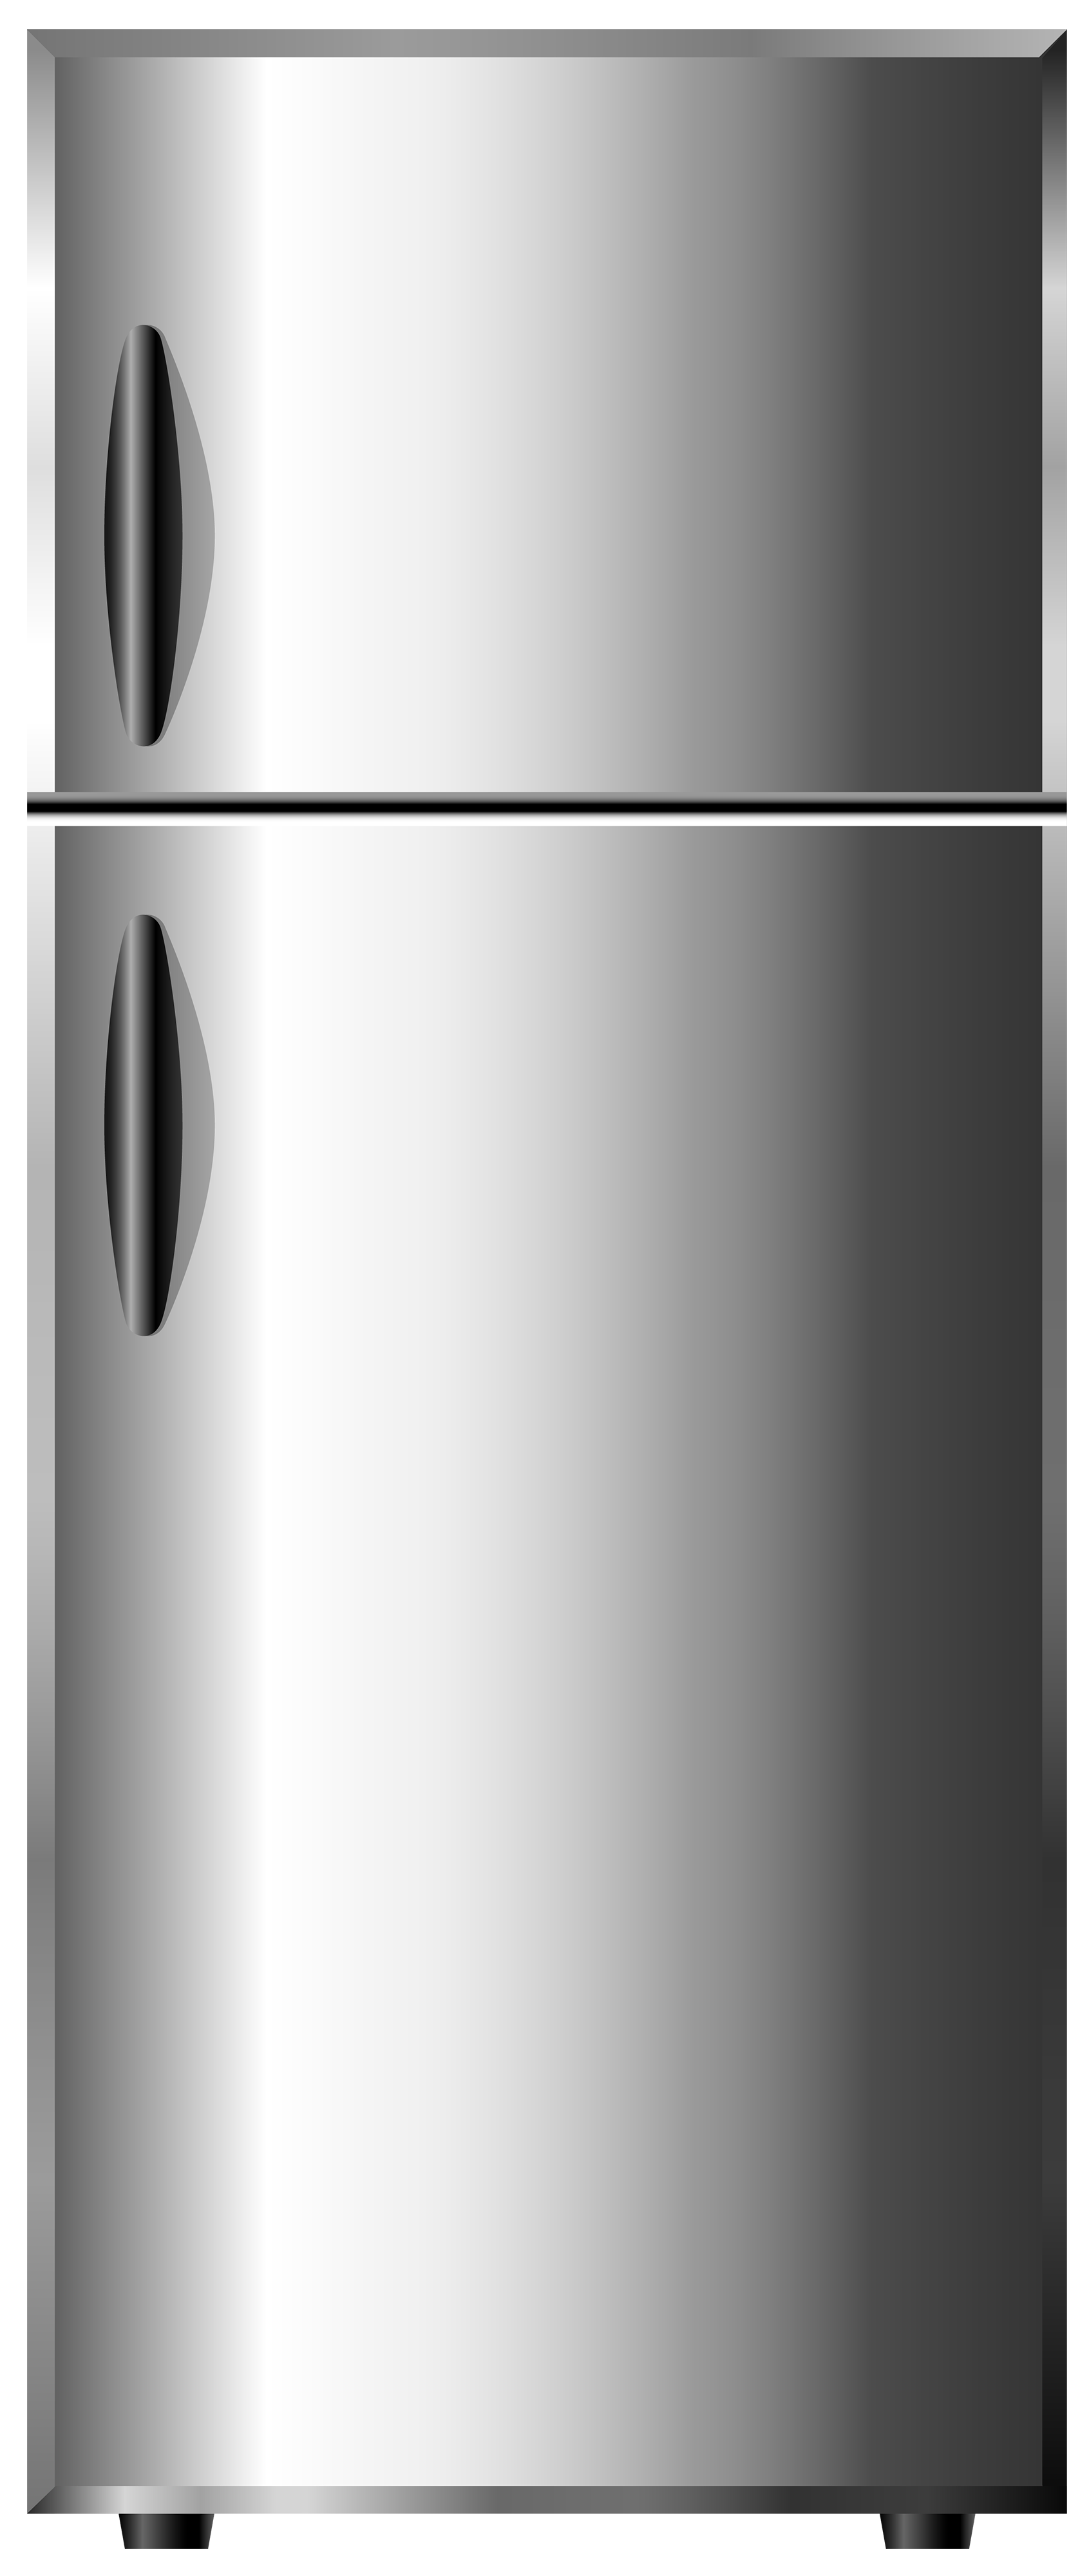 refrigerator clipart black and white - photo #42